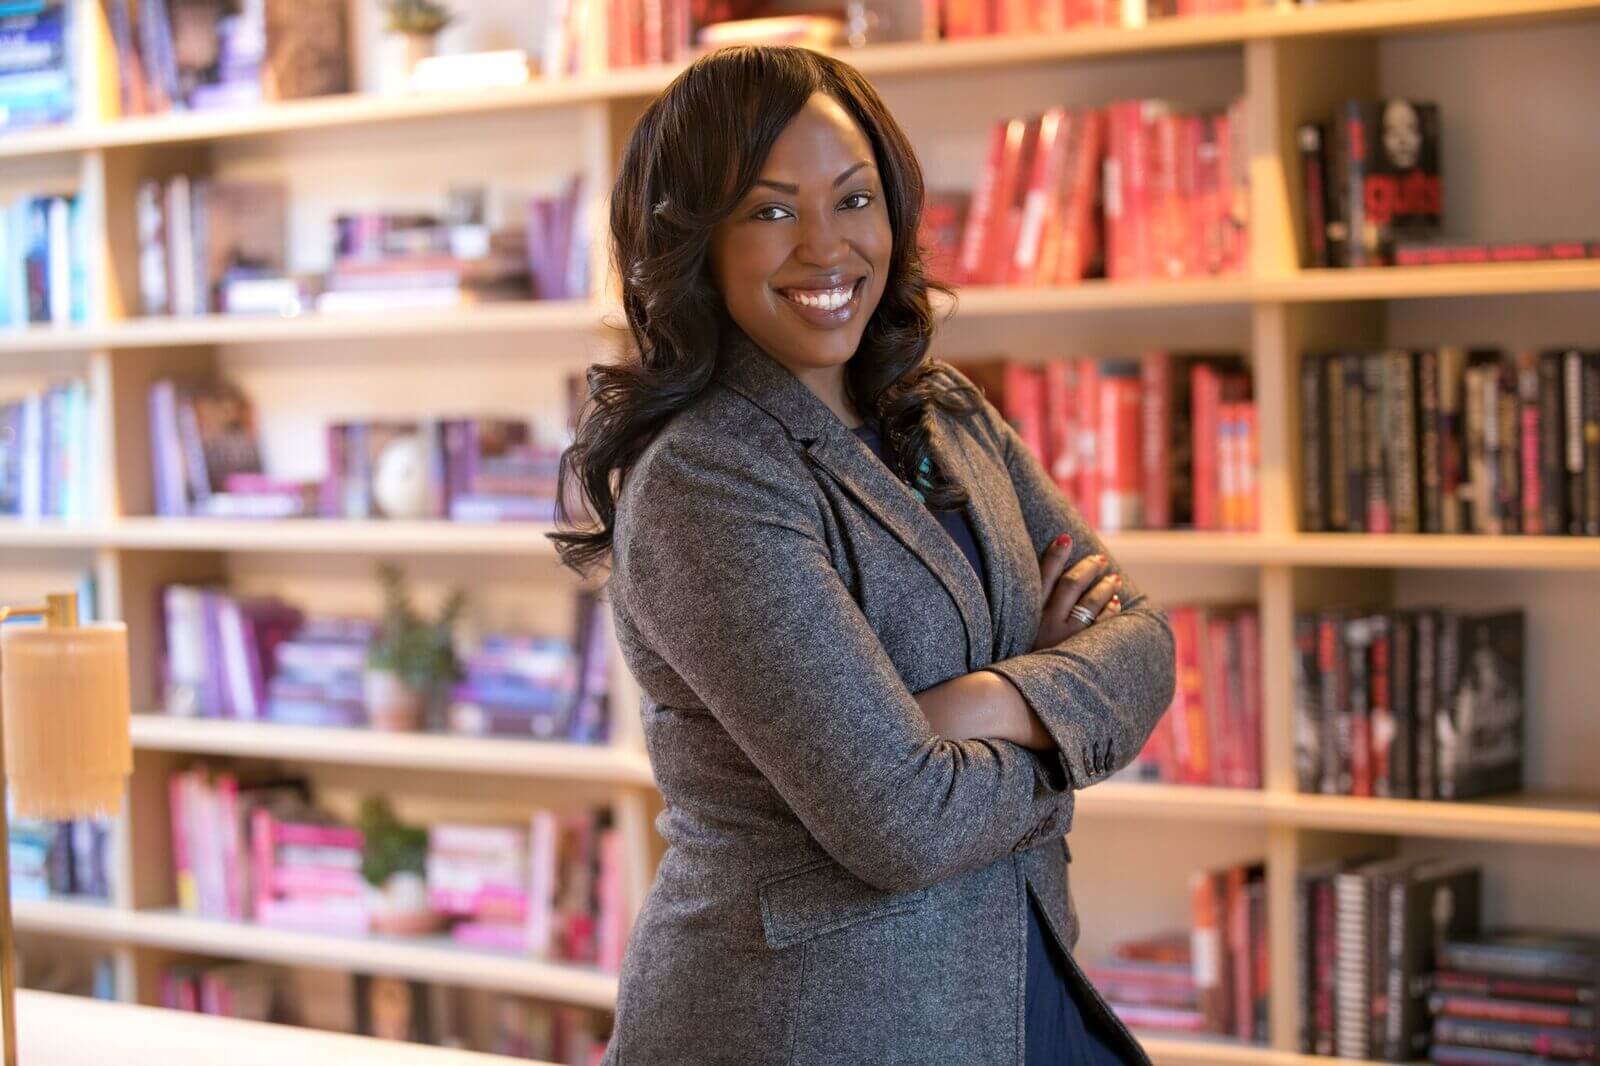 A black woman with long black hair in a gray blazer smiling with her arms crossed across her chest standing in front of a book shelf lined with red books